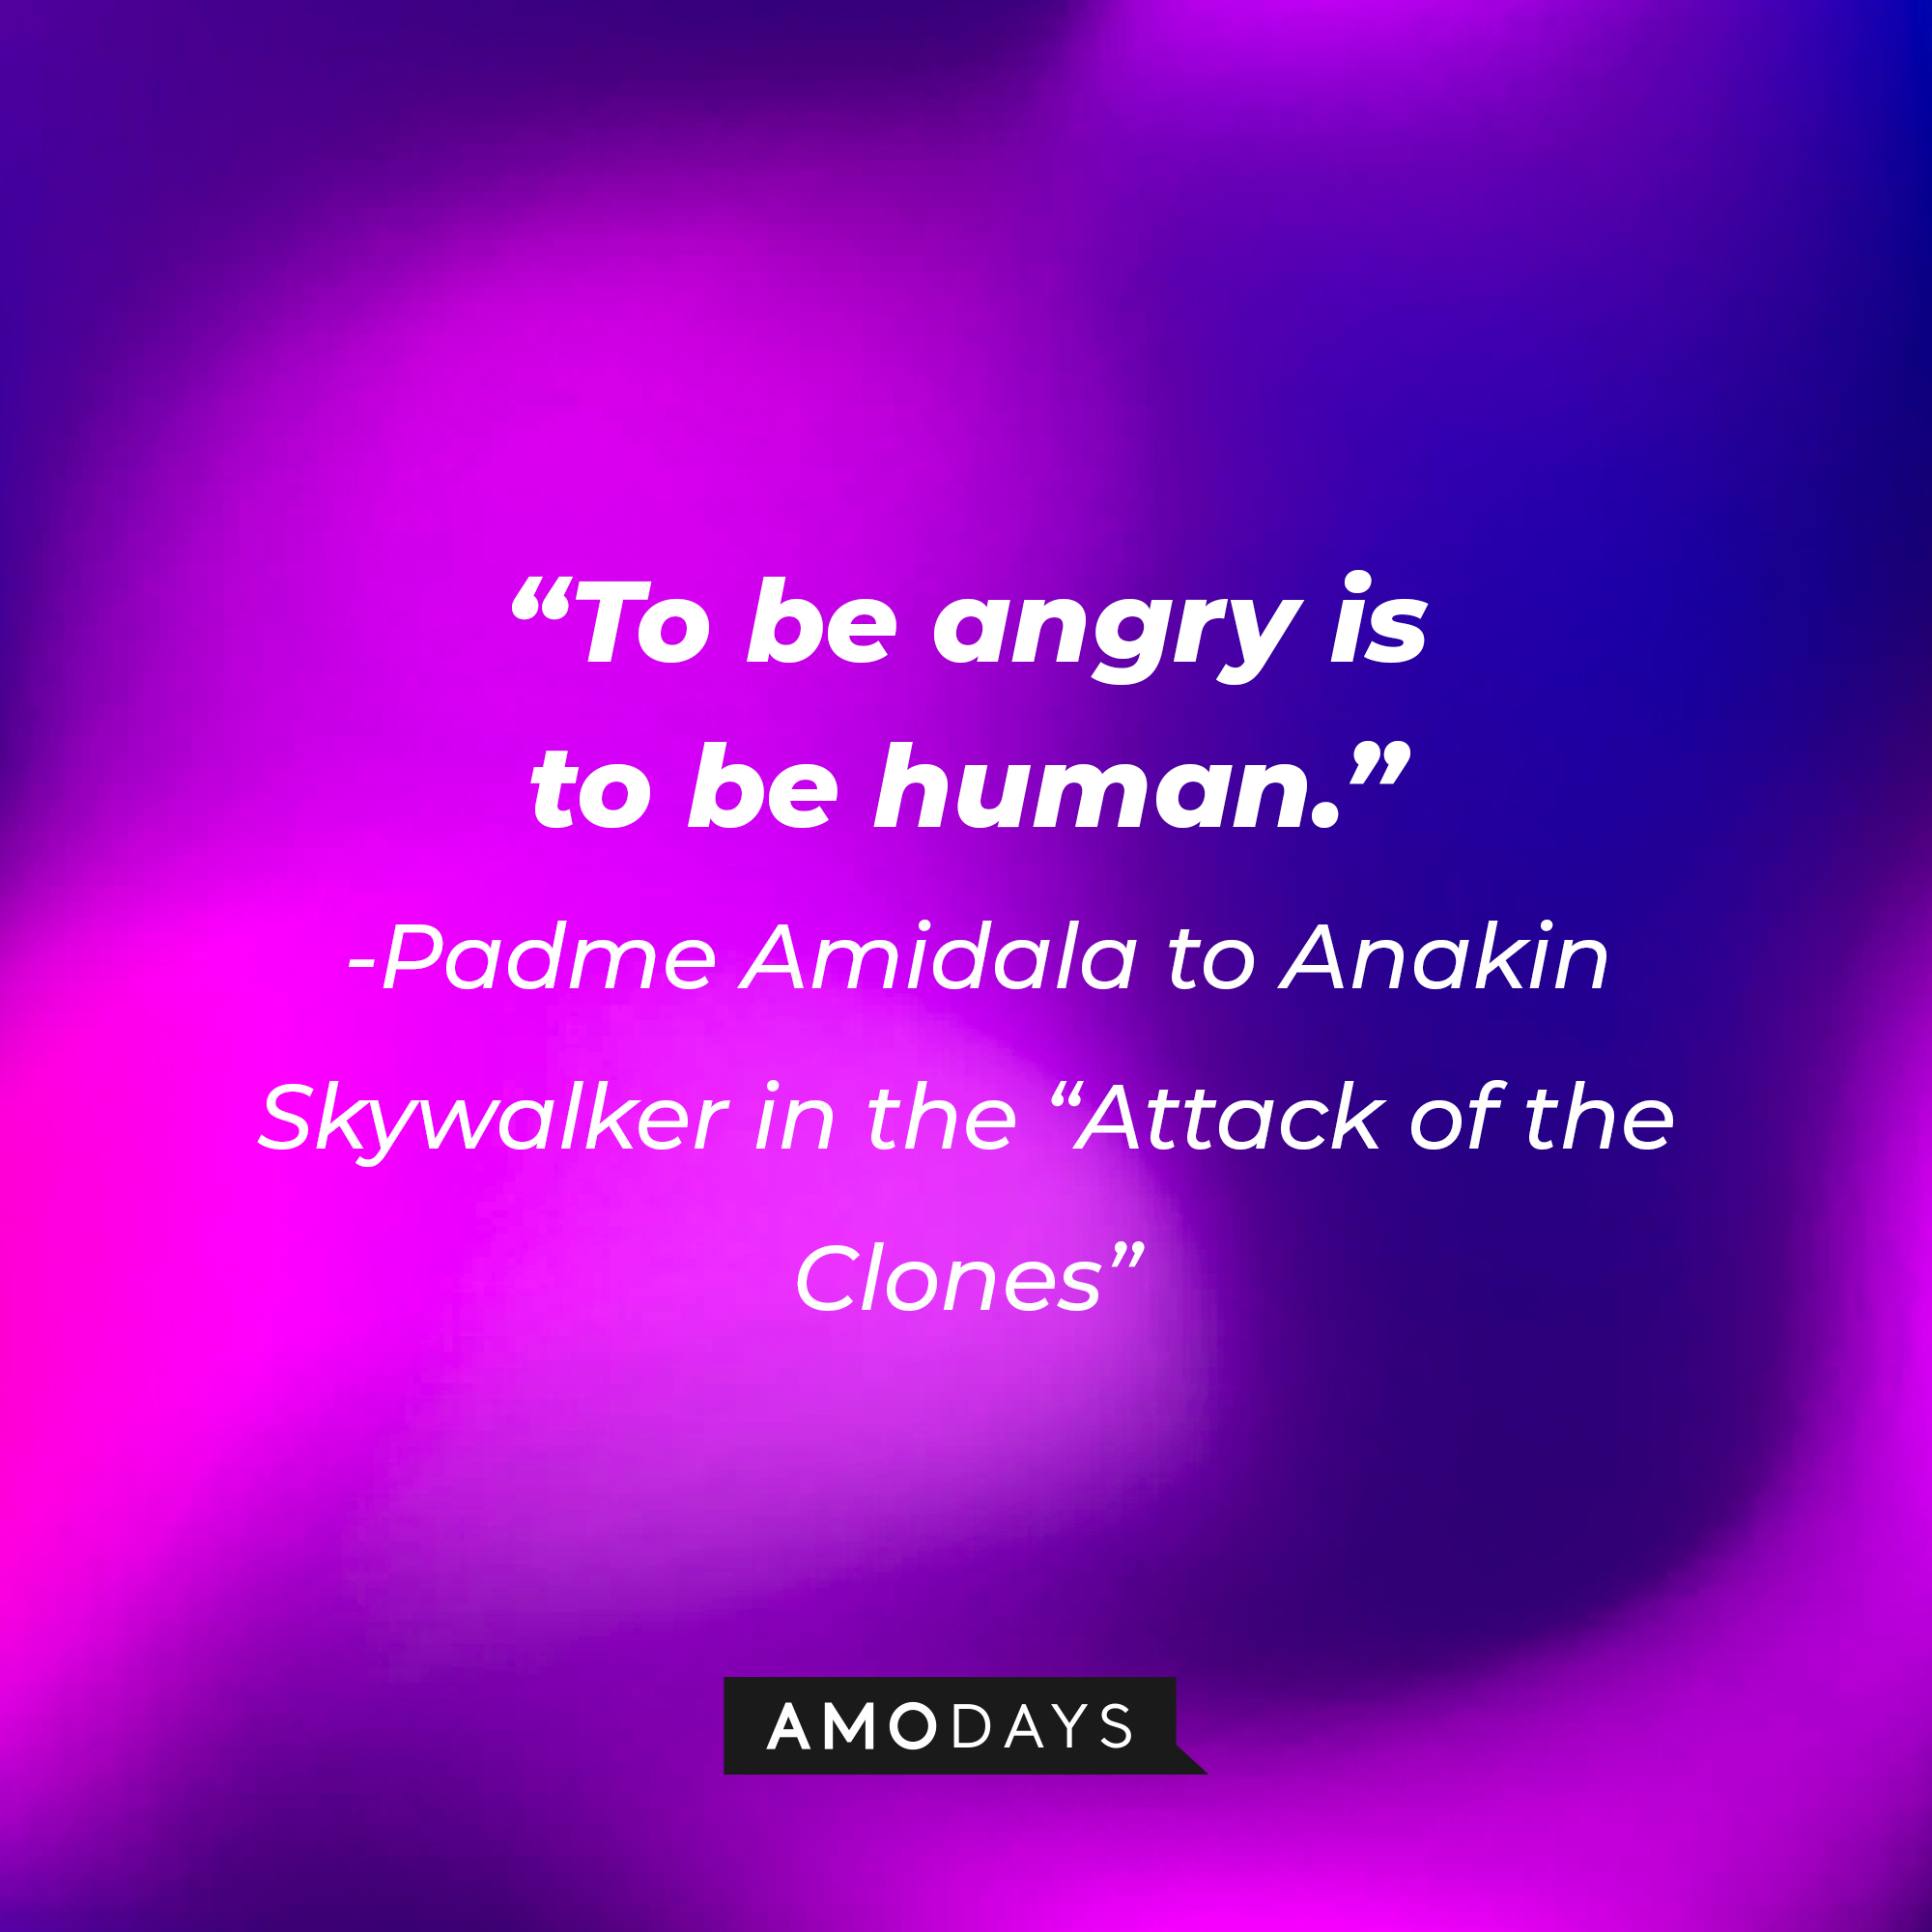 Padme Amidala's quote: "To be angry is to be human." | Source: AmoDays